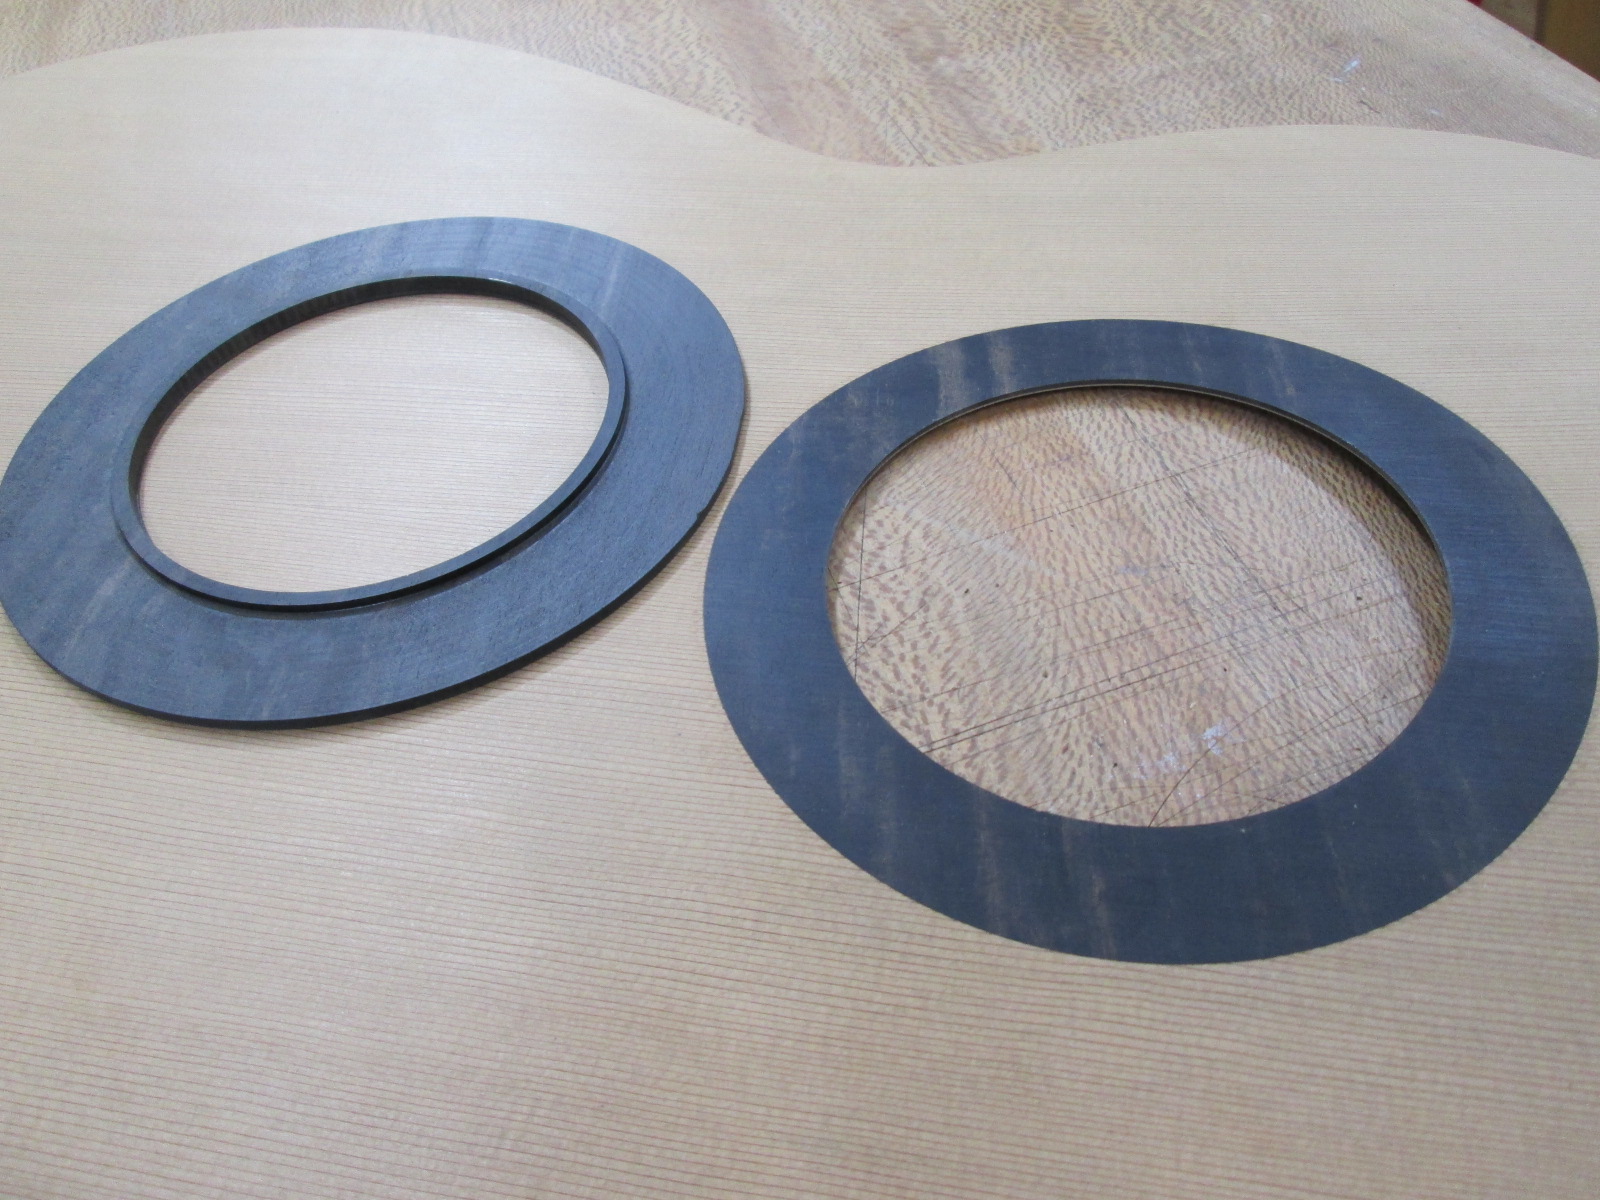 View of the rosette of the Lenvers and its all-ebony rosette reinforcement before integration-gluing.